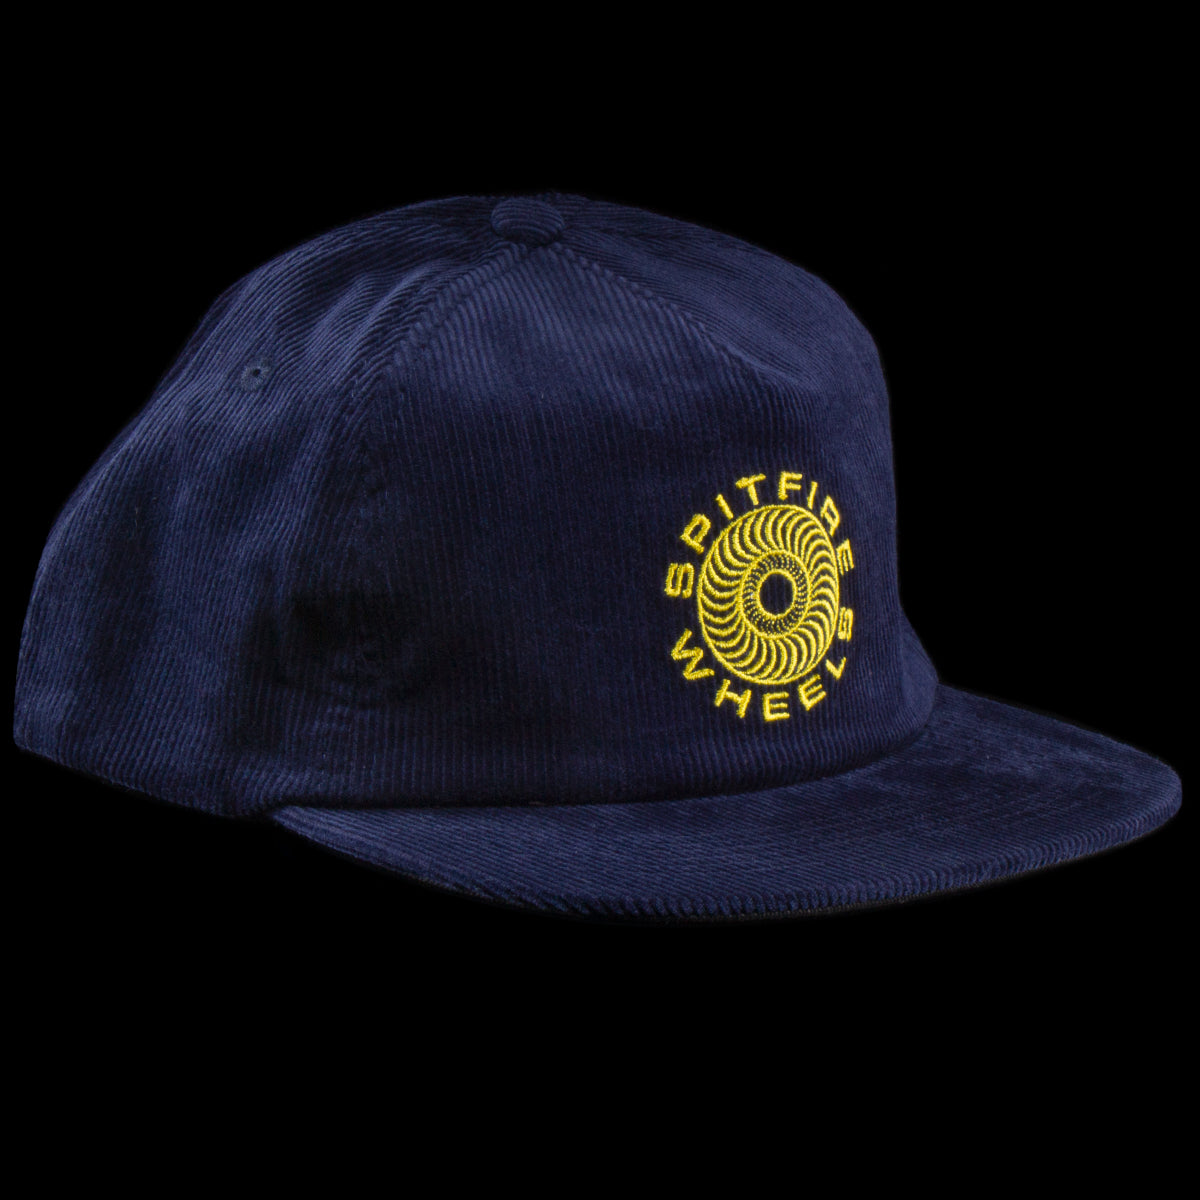 Spitfire Classic 87 Swirl Hat Color : Navy / Gold